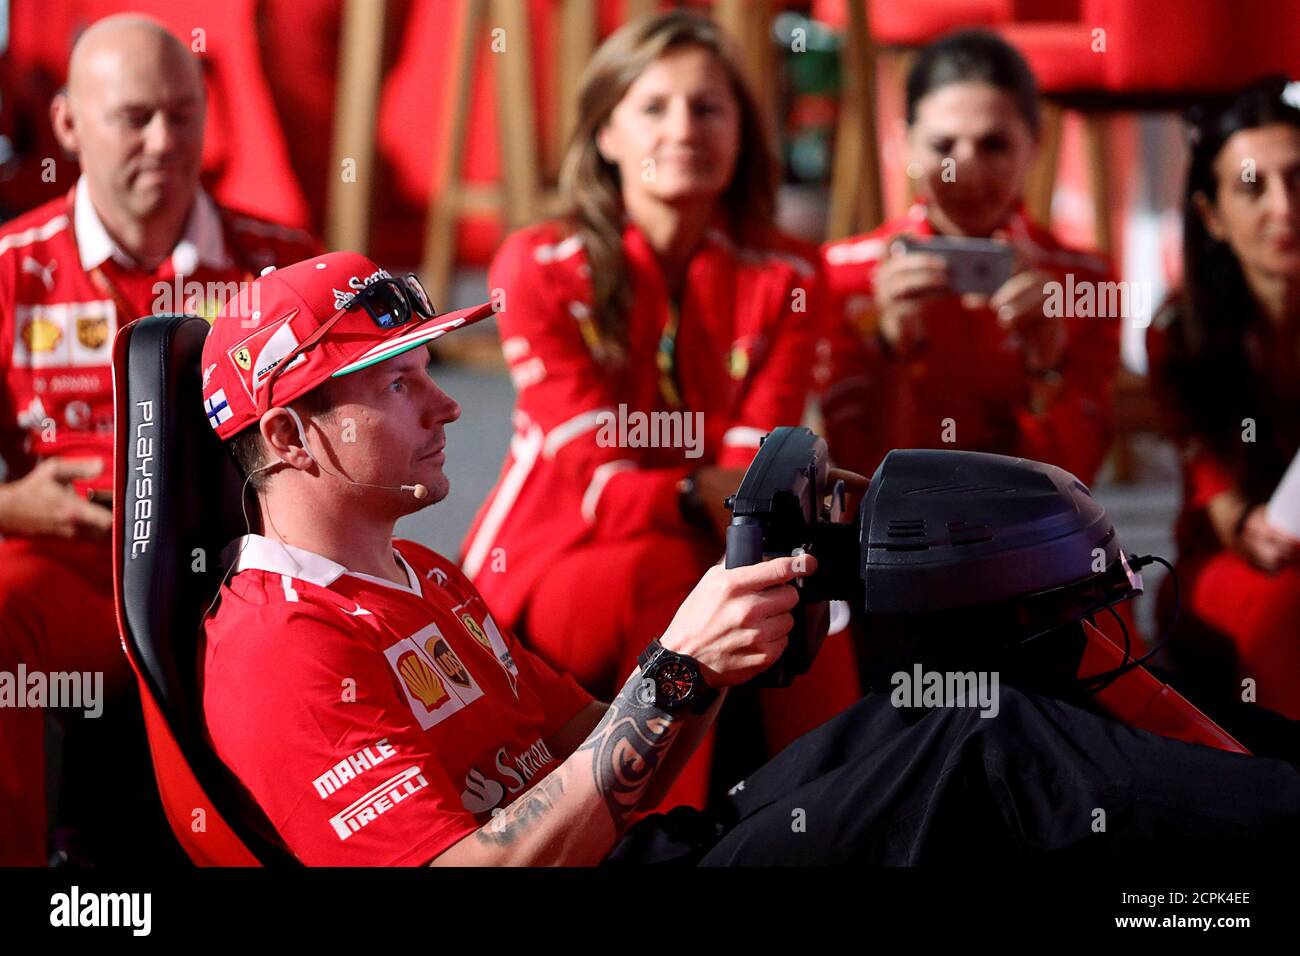 Ferrari's Kimi Raikkonen of Finland competes on a racing simulator ahead of the Mexican F1 Grand Prix on October 29, in Mexico City, Mexico, October 26, 2017. REUTERS/Edgard Garrido Stock Photo